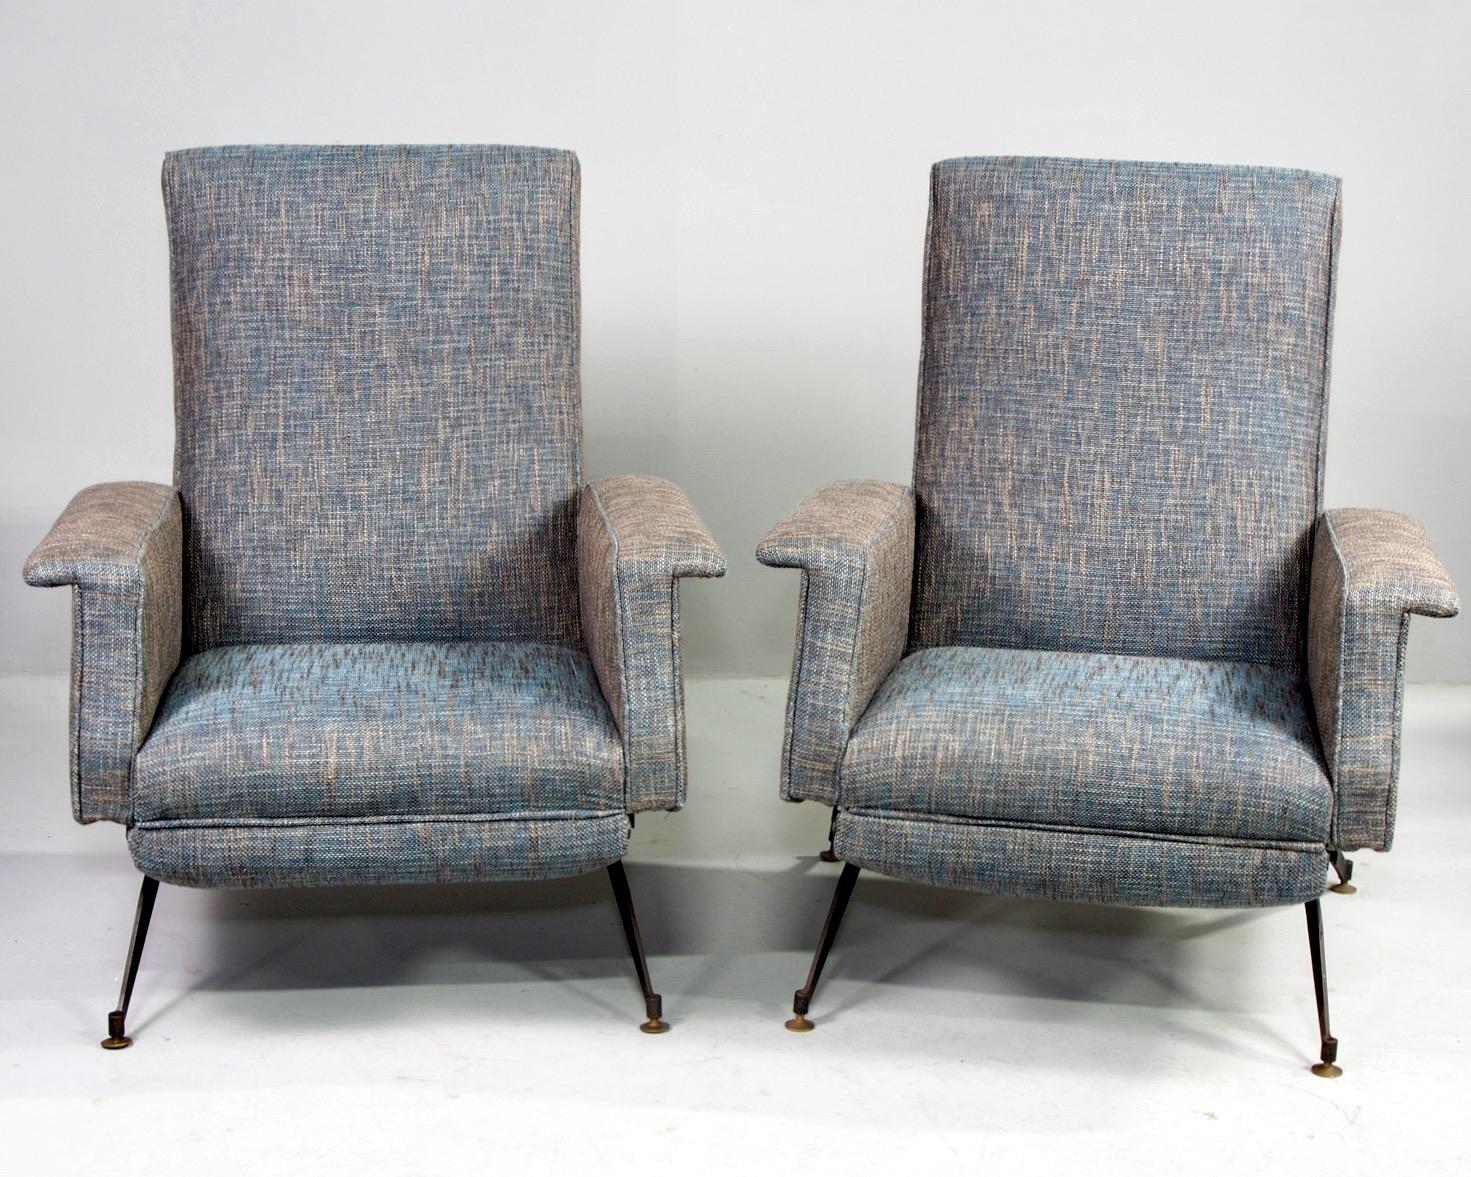 Italian pair of reclining armchairs have been professionally upholstered in blue and taupe tweed fabric, circa 1950s. Chairs feature slender black metal legs, flat-topped arm rests and tall seat backs that recline. These chairs have a manual